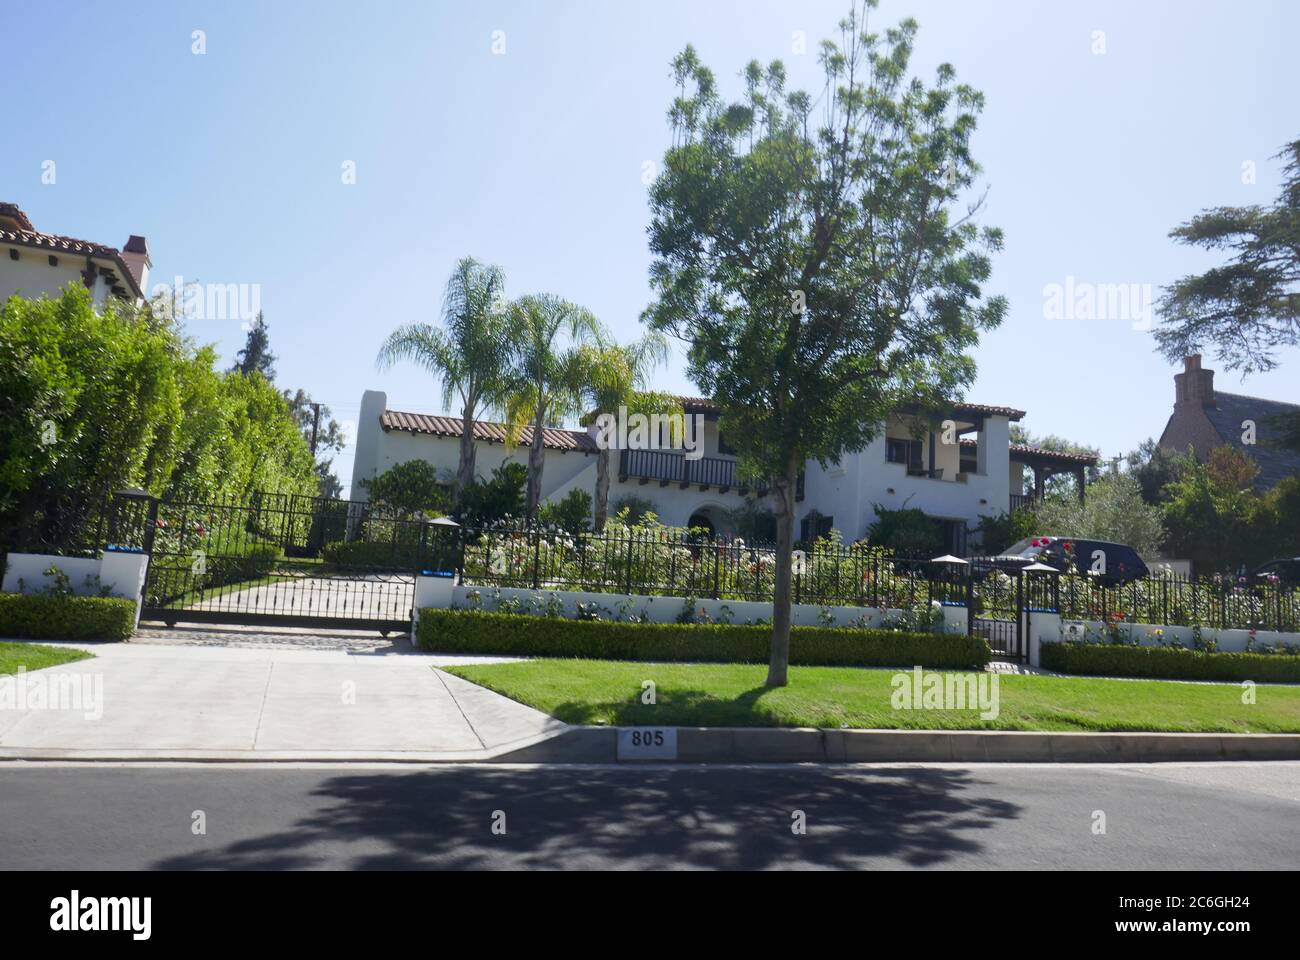 Beverly Hills, California, USA 9th July 2020 A general view of atmosphere of site of Howard Hughe's 1946 XF-11 plane crash at 802 and 805 N.Linden Drive on July 9, 2020 in Beverly Hills, California, USA. Photo by Barry King/Alamy Stock Photo Stock Photo